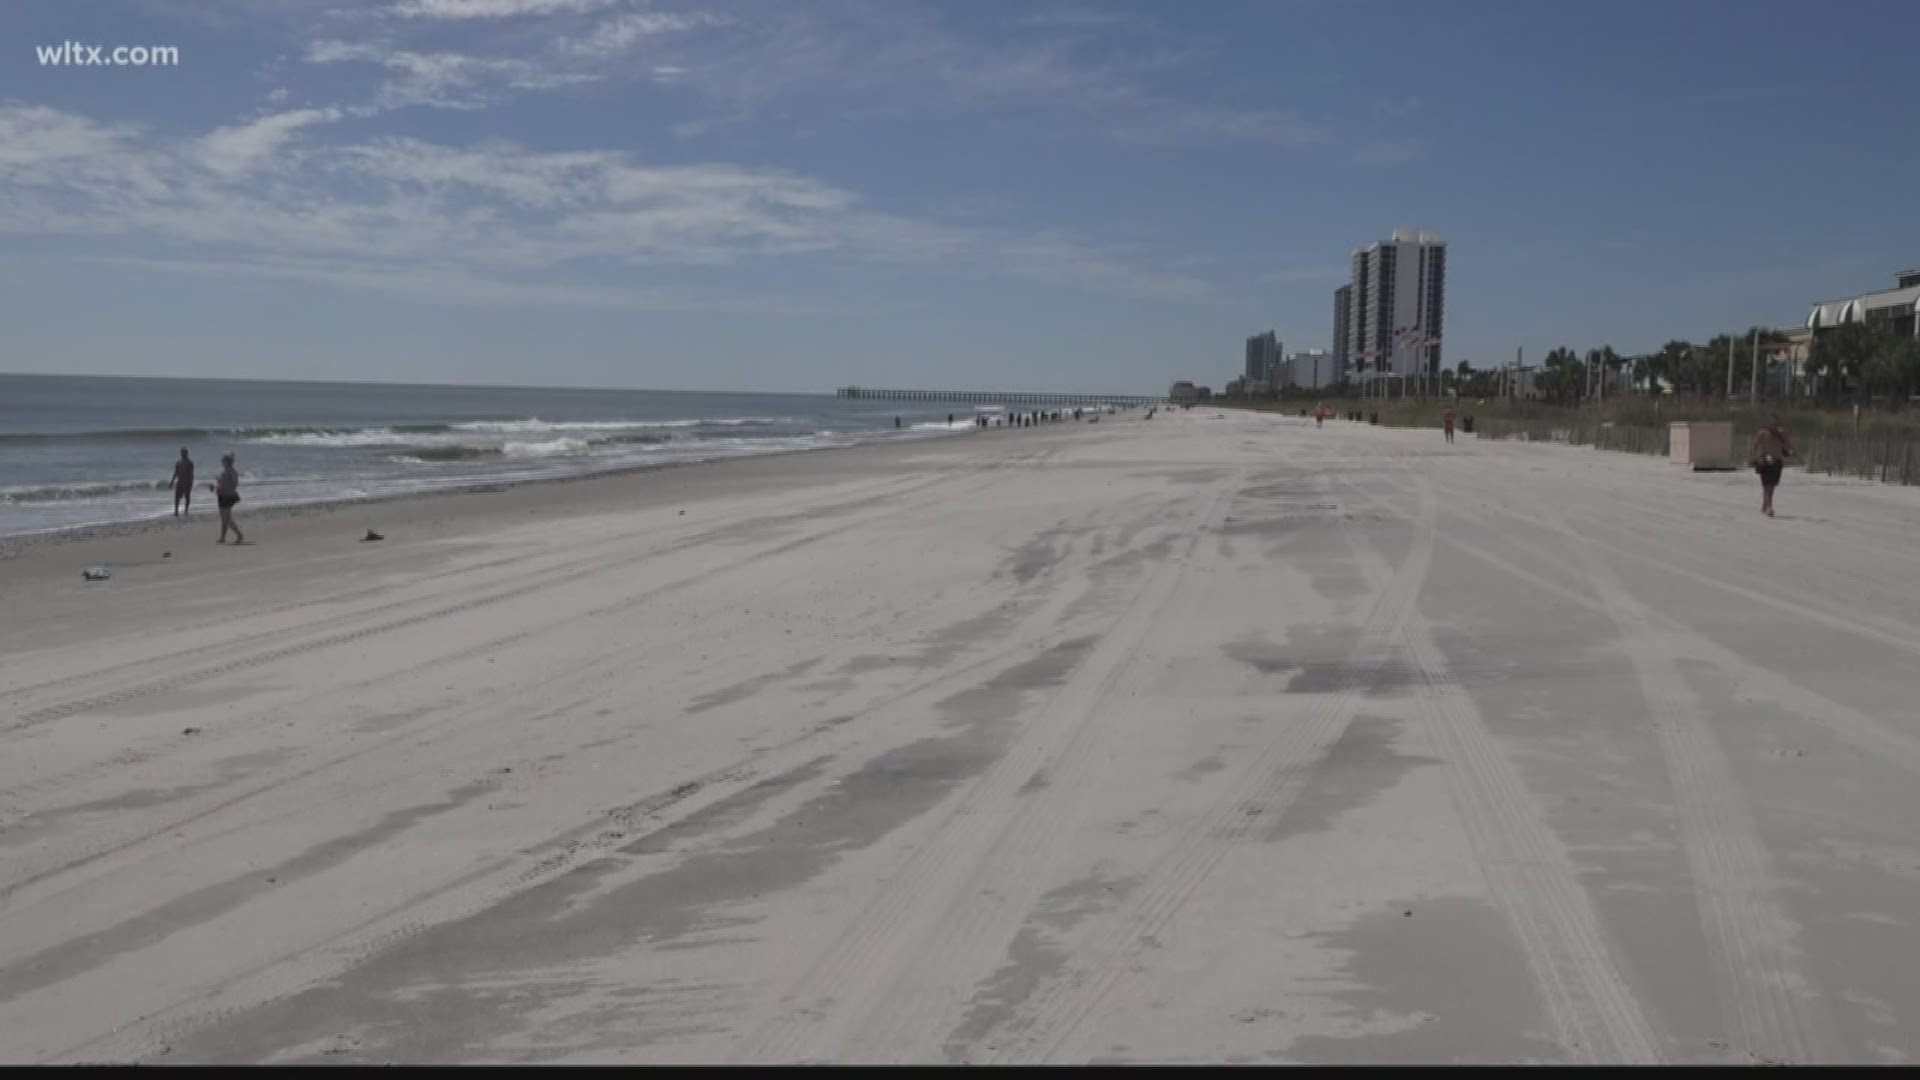 Myrtle Beach did not get as much storm surge as forecast, so the beaches didn't really suffer much damage from Dorian.